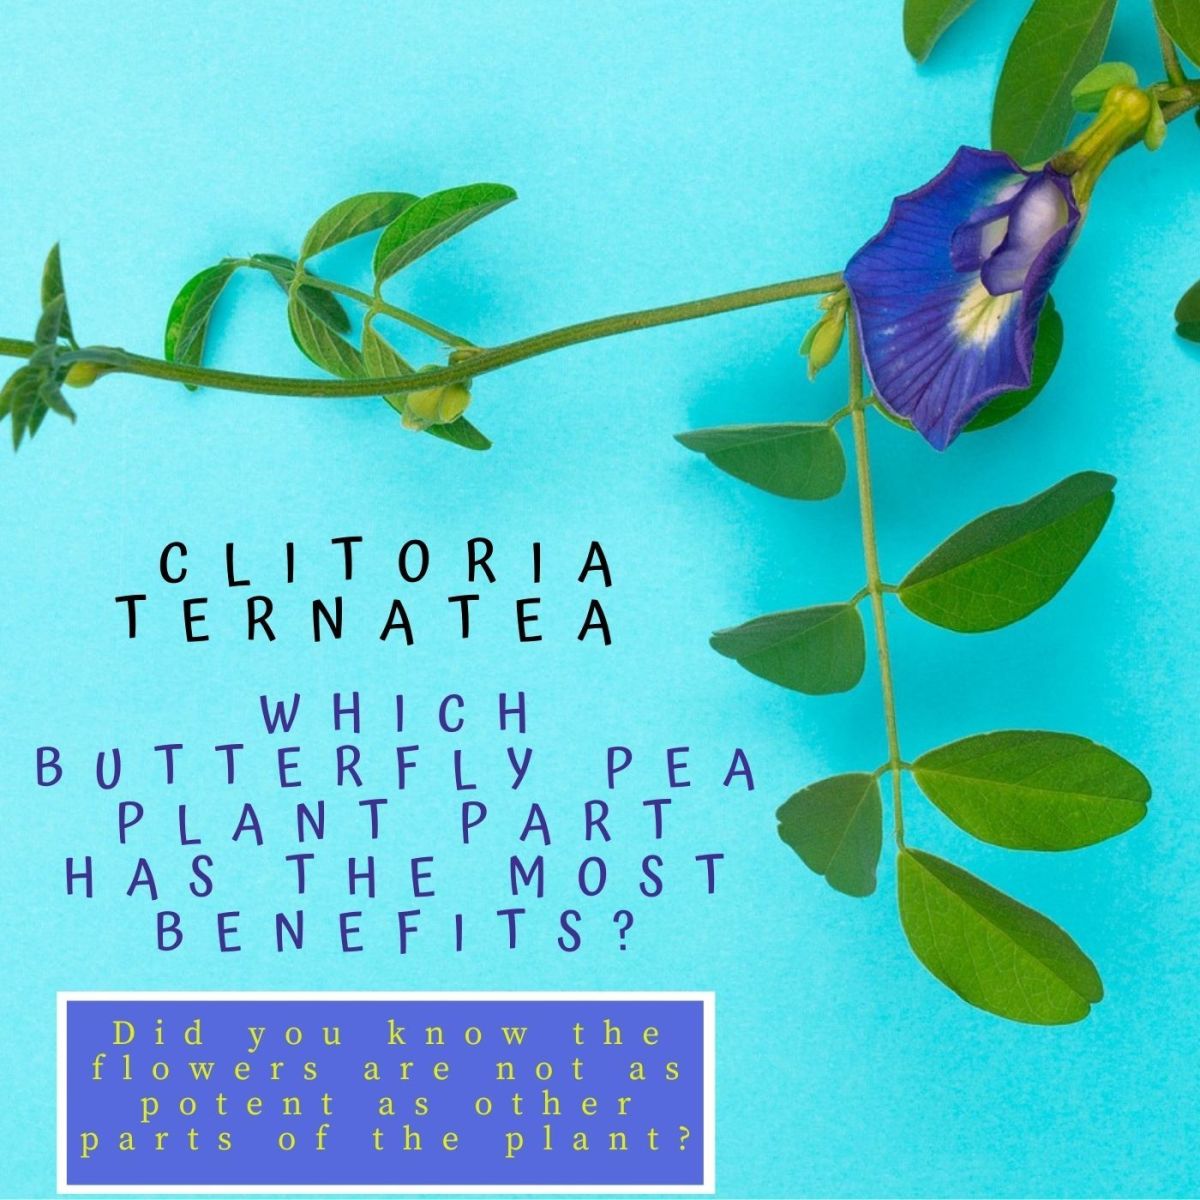 Despite what you have heard, the flower is not as potent as other parts of the butterfly pea plant. Read on to learn more.